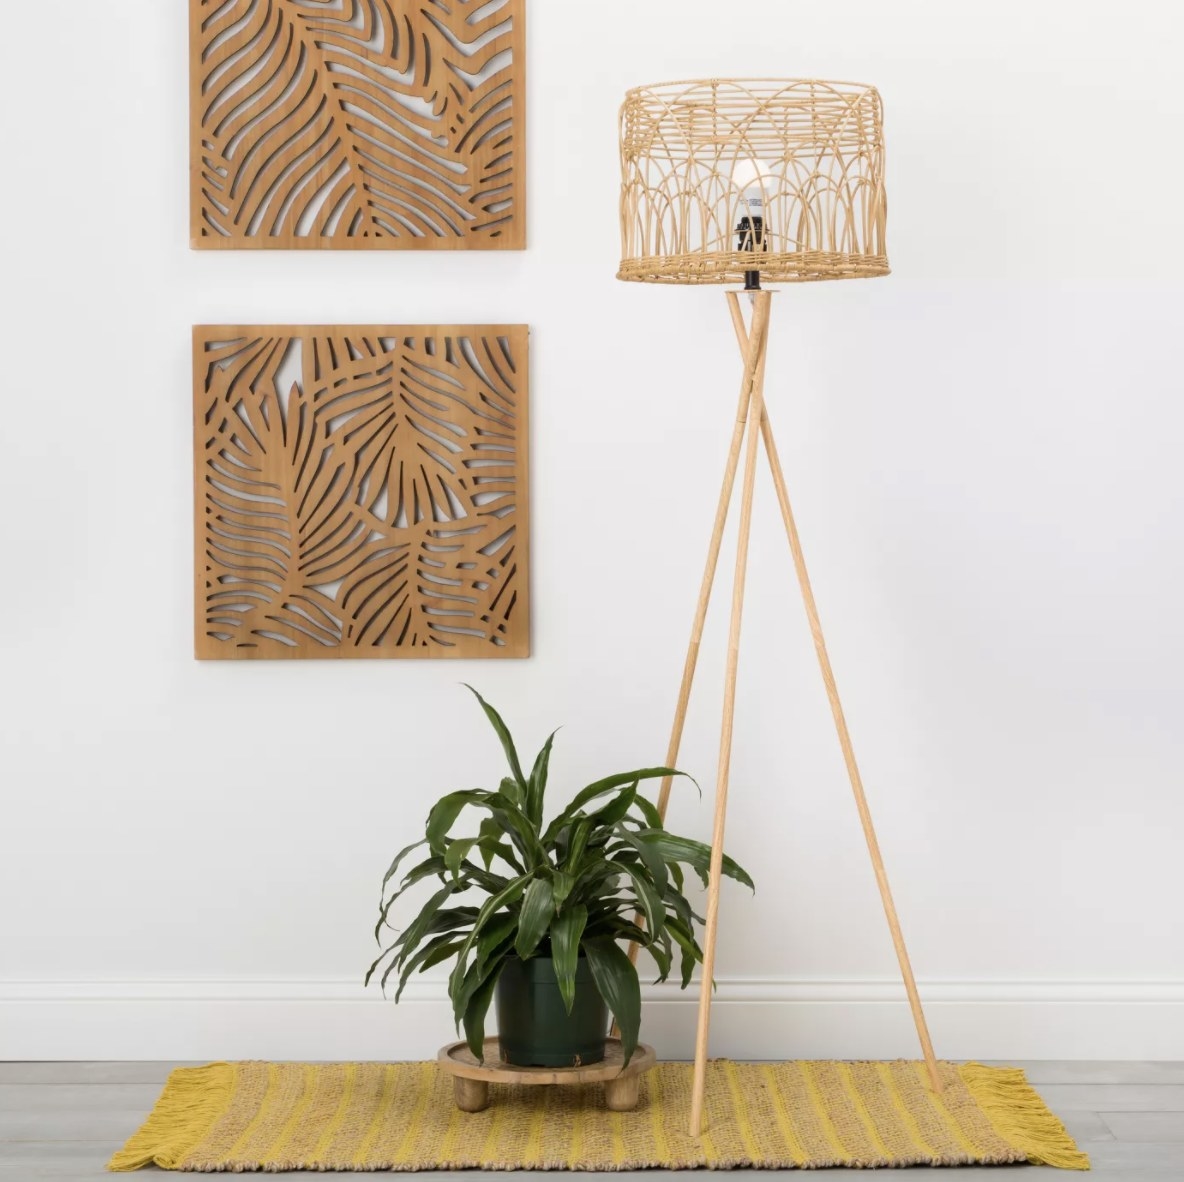 There are two wooden square palm leaf panels are hung on a blank wall and are surrounded by boho decor